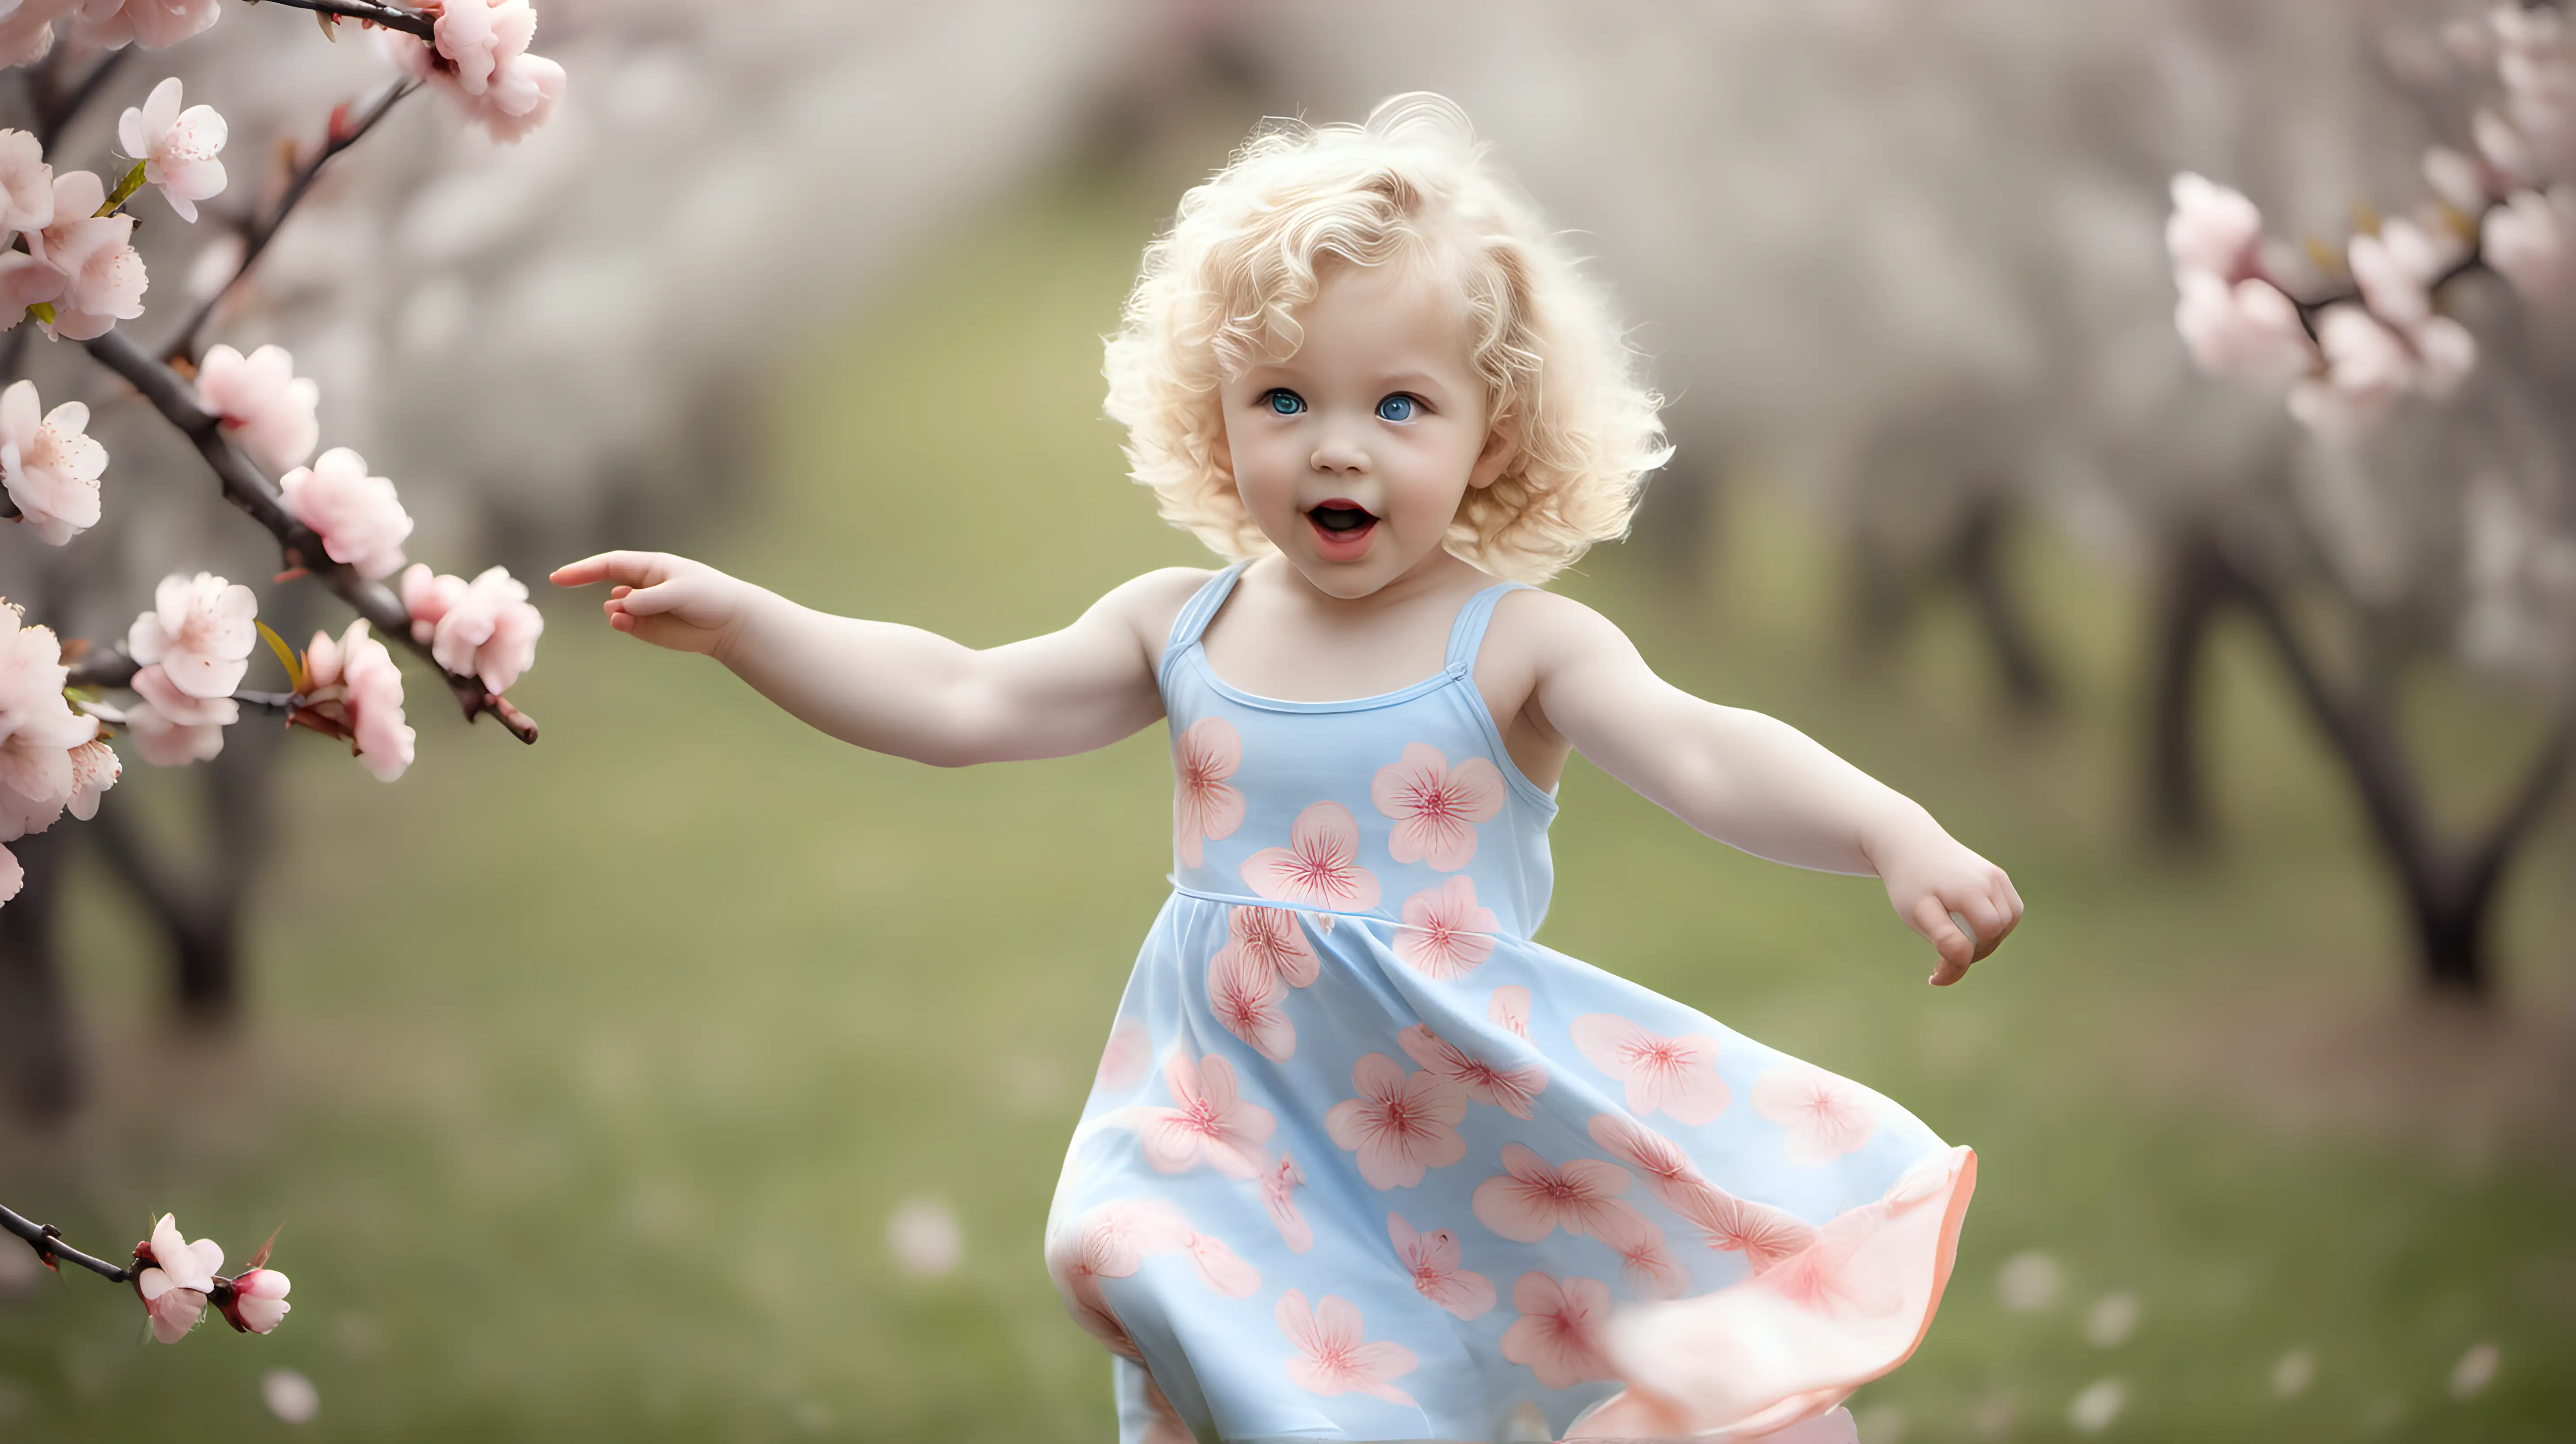 Enchanting Toddler Twirling Amidst Peach Blossoms